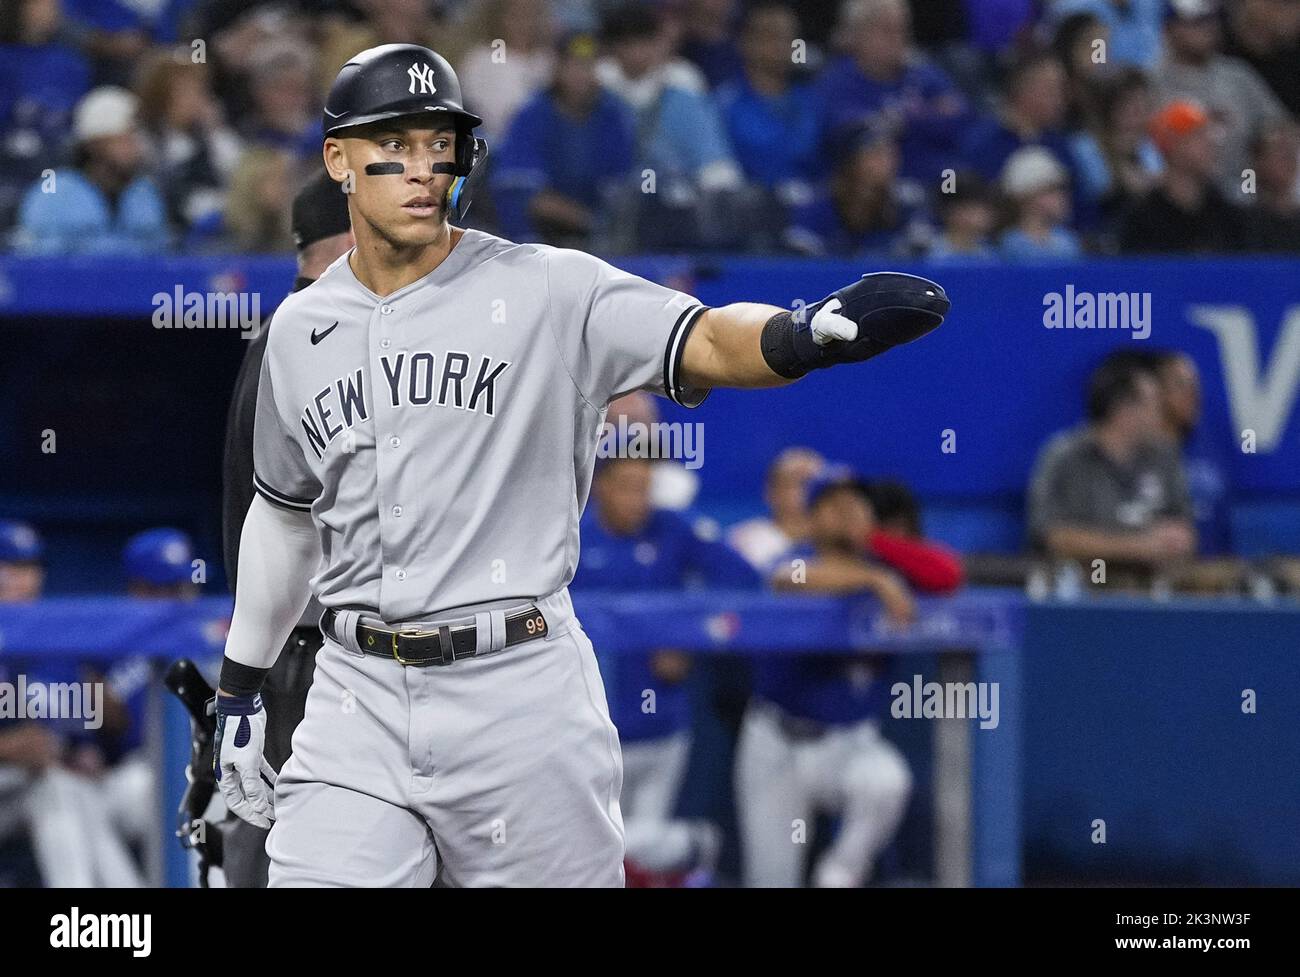 Toronto, Canada. 25th Sep, 2022. New York Yankees center fielder Aaron Judge celebrates scoring on a single from teammate second baseman Gleyber Torres in the third inning against the Toronto Blue Jays at Rogers Centre in Toronto, Canada on Tuesday, September 27, 2022. Aaron Judge is one home run away from tying the American League and Yankees club record with 61 home runs set by Roger Maris. Photo by Andrew Lahodynskyj/UPI Credit: UPI/Alamy Live News Stock Photo